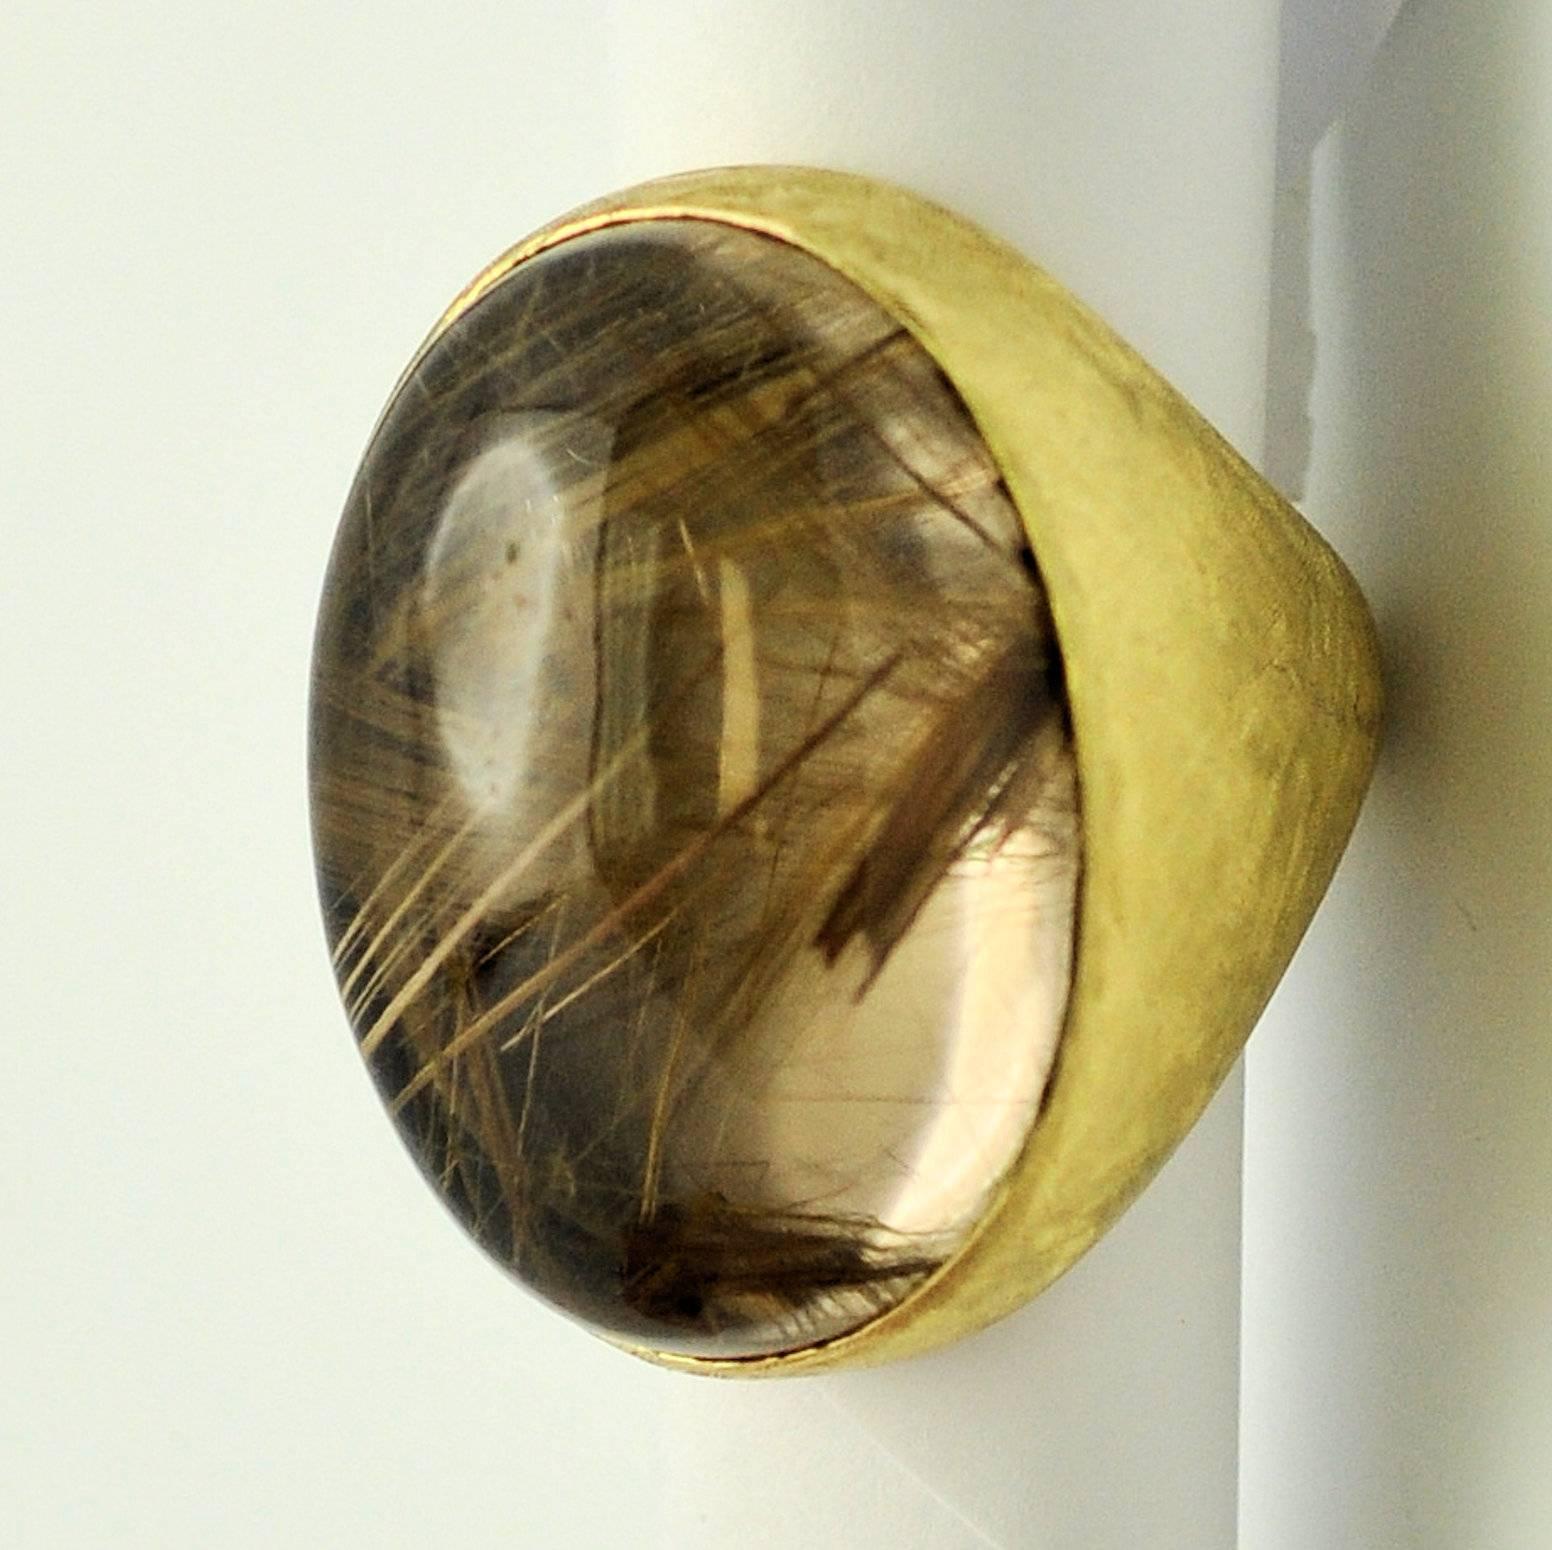 Imposing Florentine finish 18K yellow gold ring with bezel set large oval rutilated quartz cabochon.  Well made squared shank makes the ring more stable.  The rutile is well-distributed throughout the stone.  27.7 dwt gross wt. Sizing bumps in the